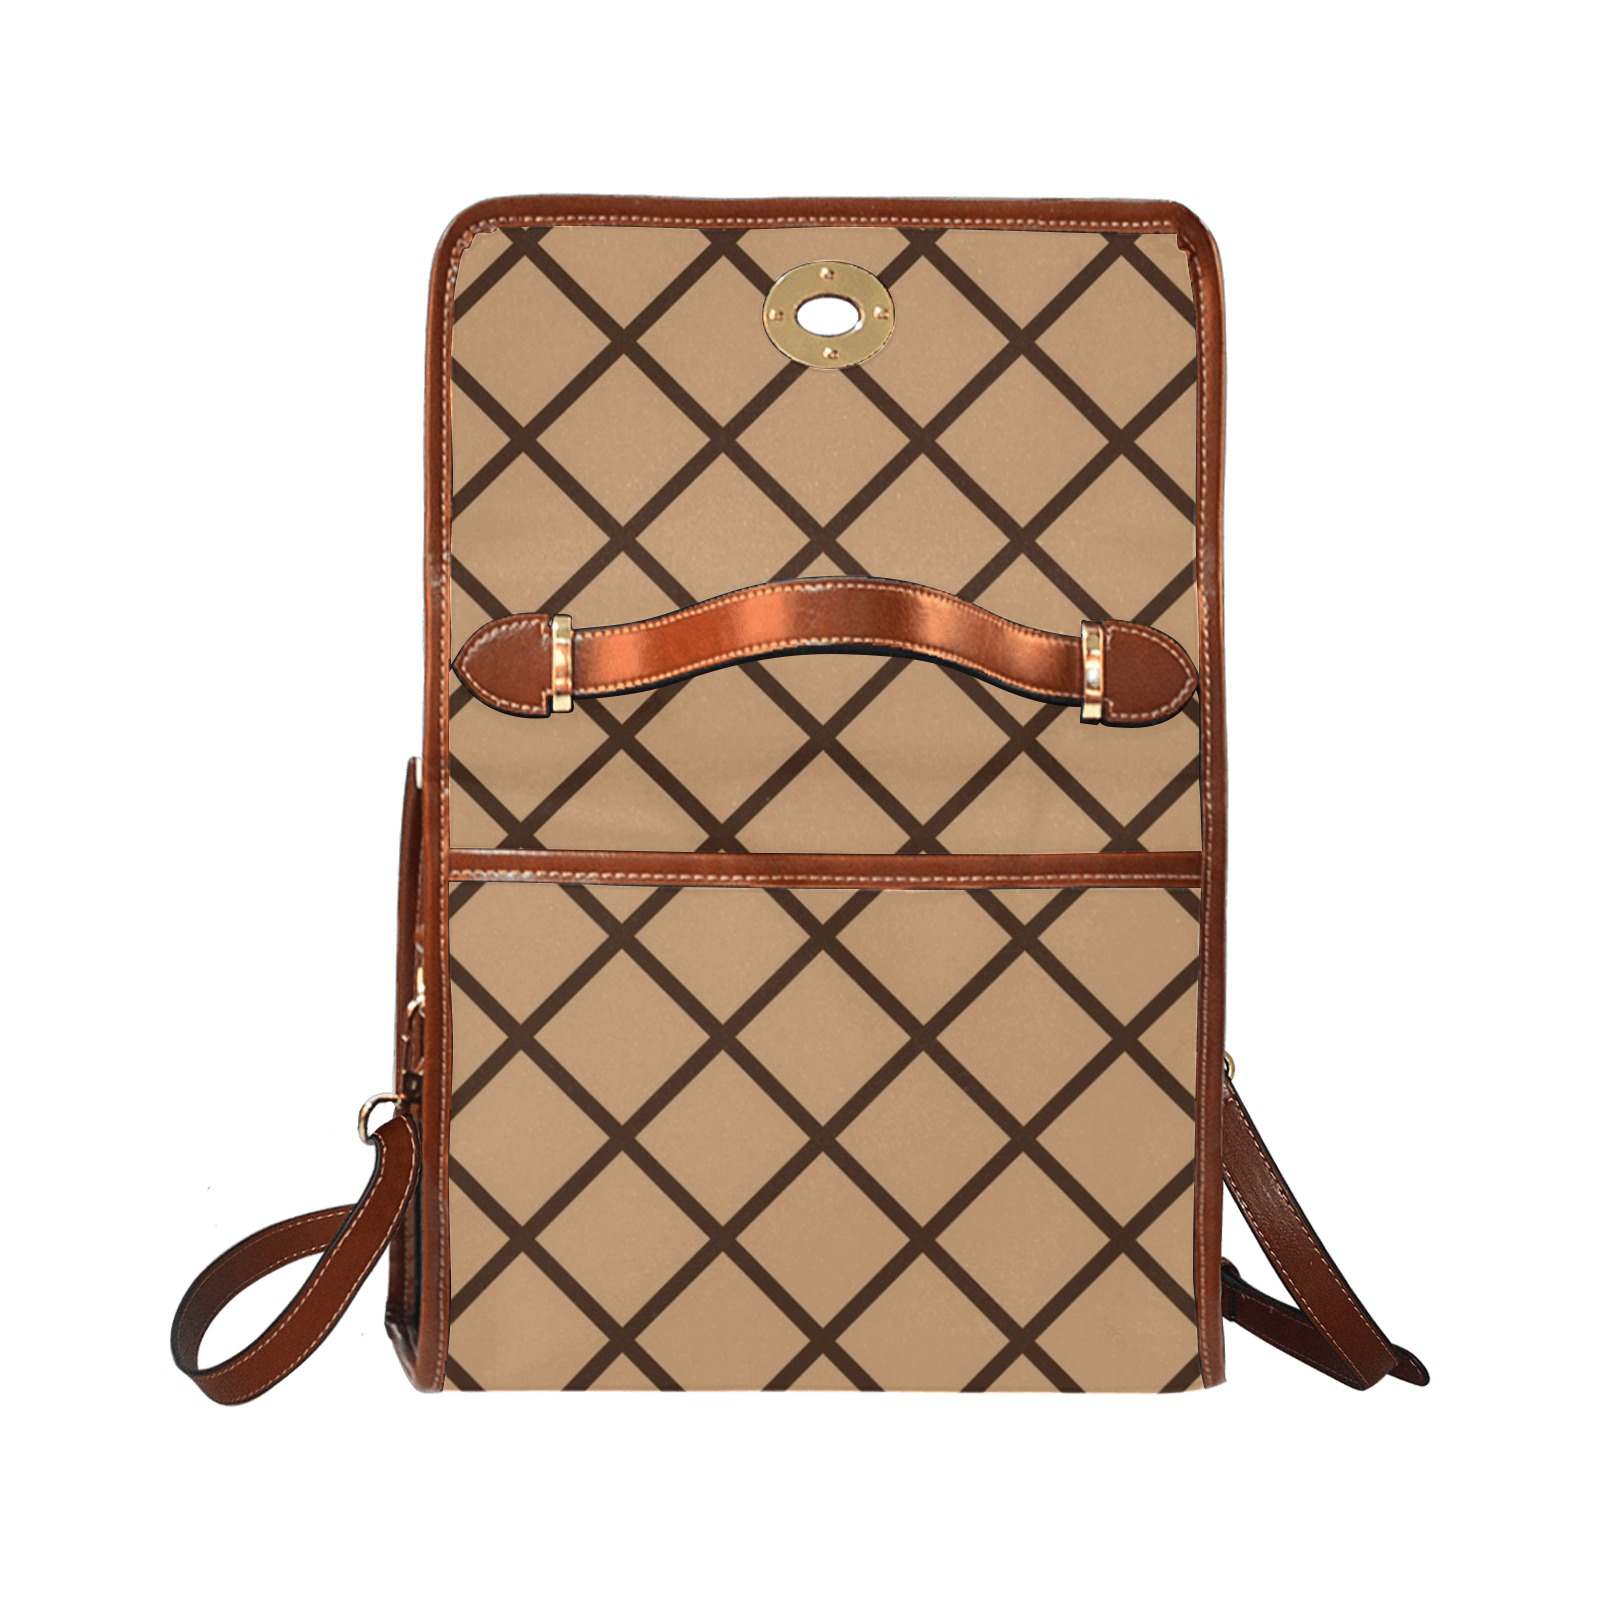 Geometric Abstract - Repper Waterproof Canvas Bag-Brown (All Over Print) (Model 1641)